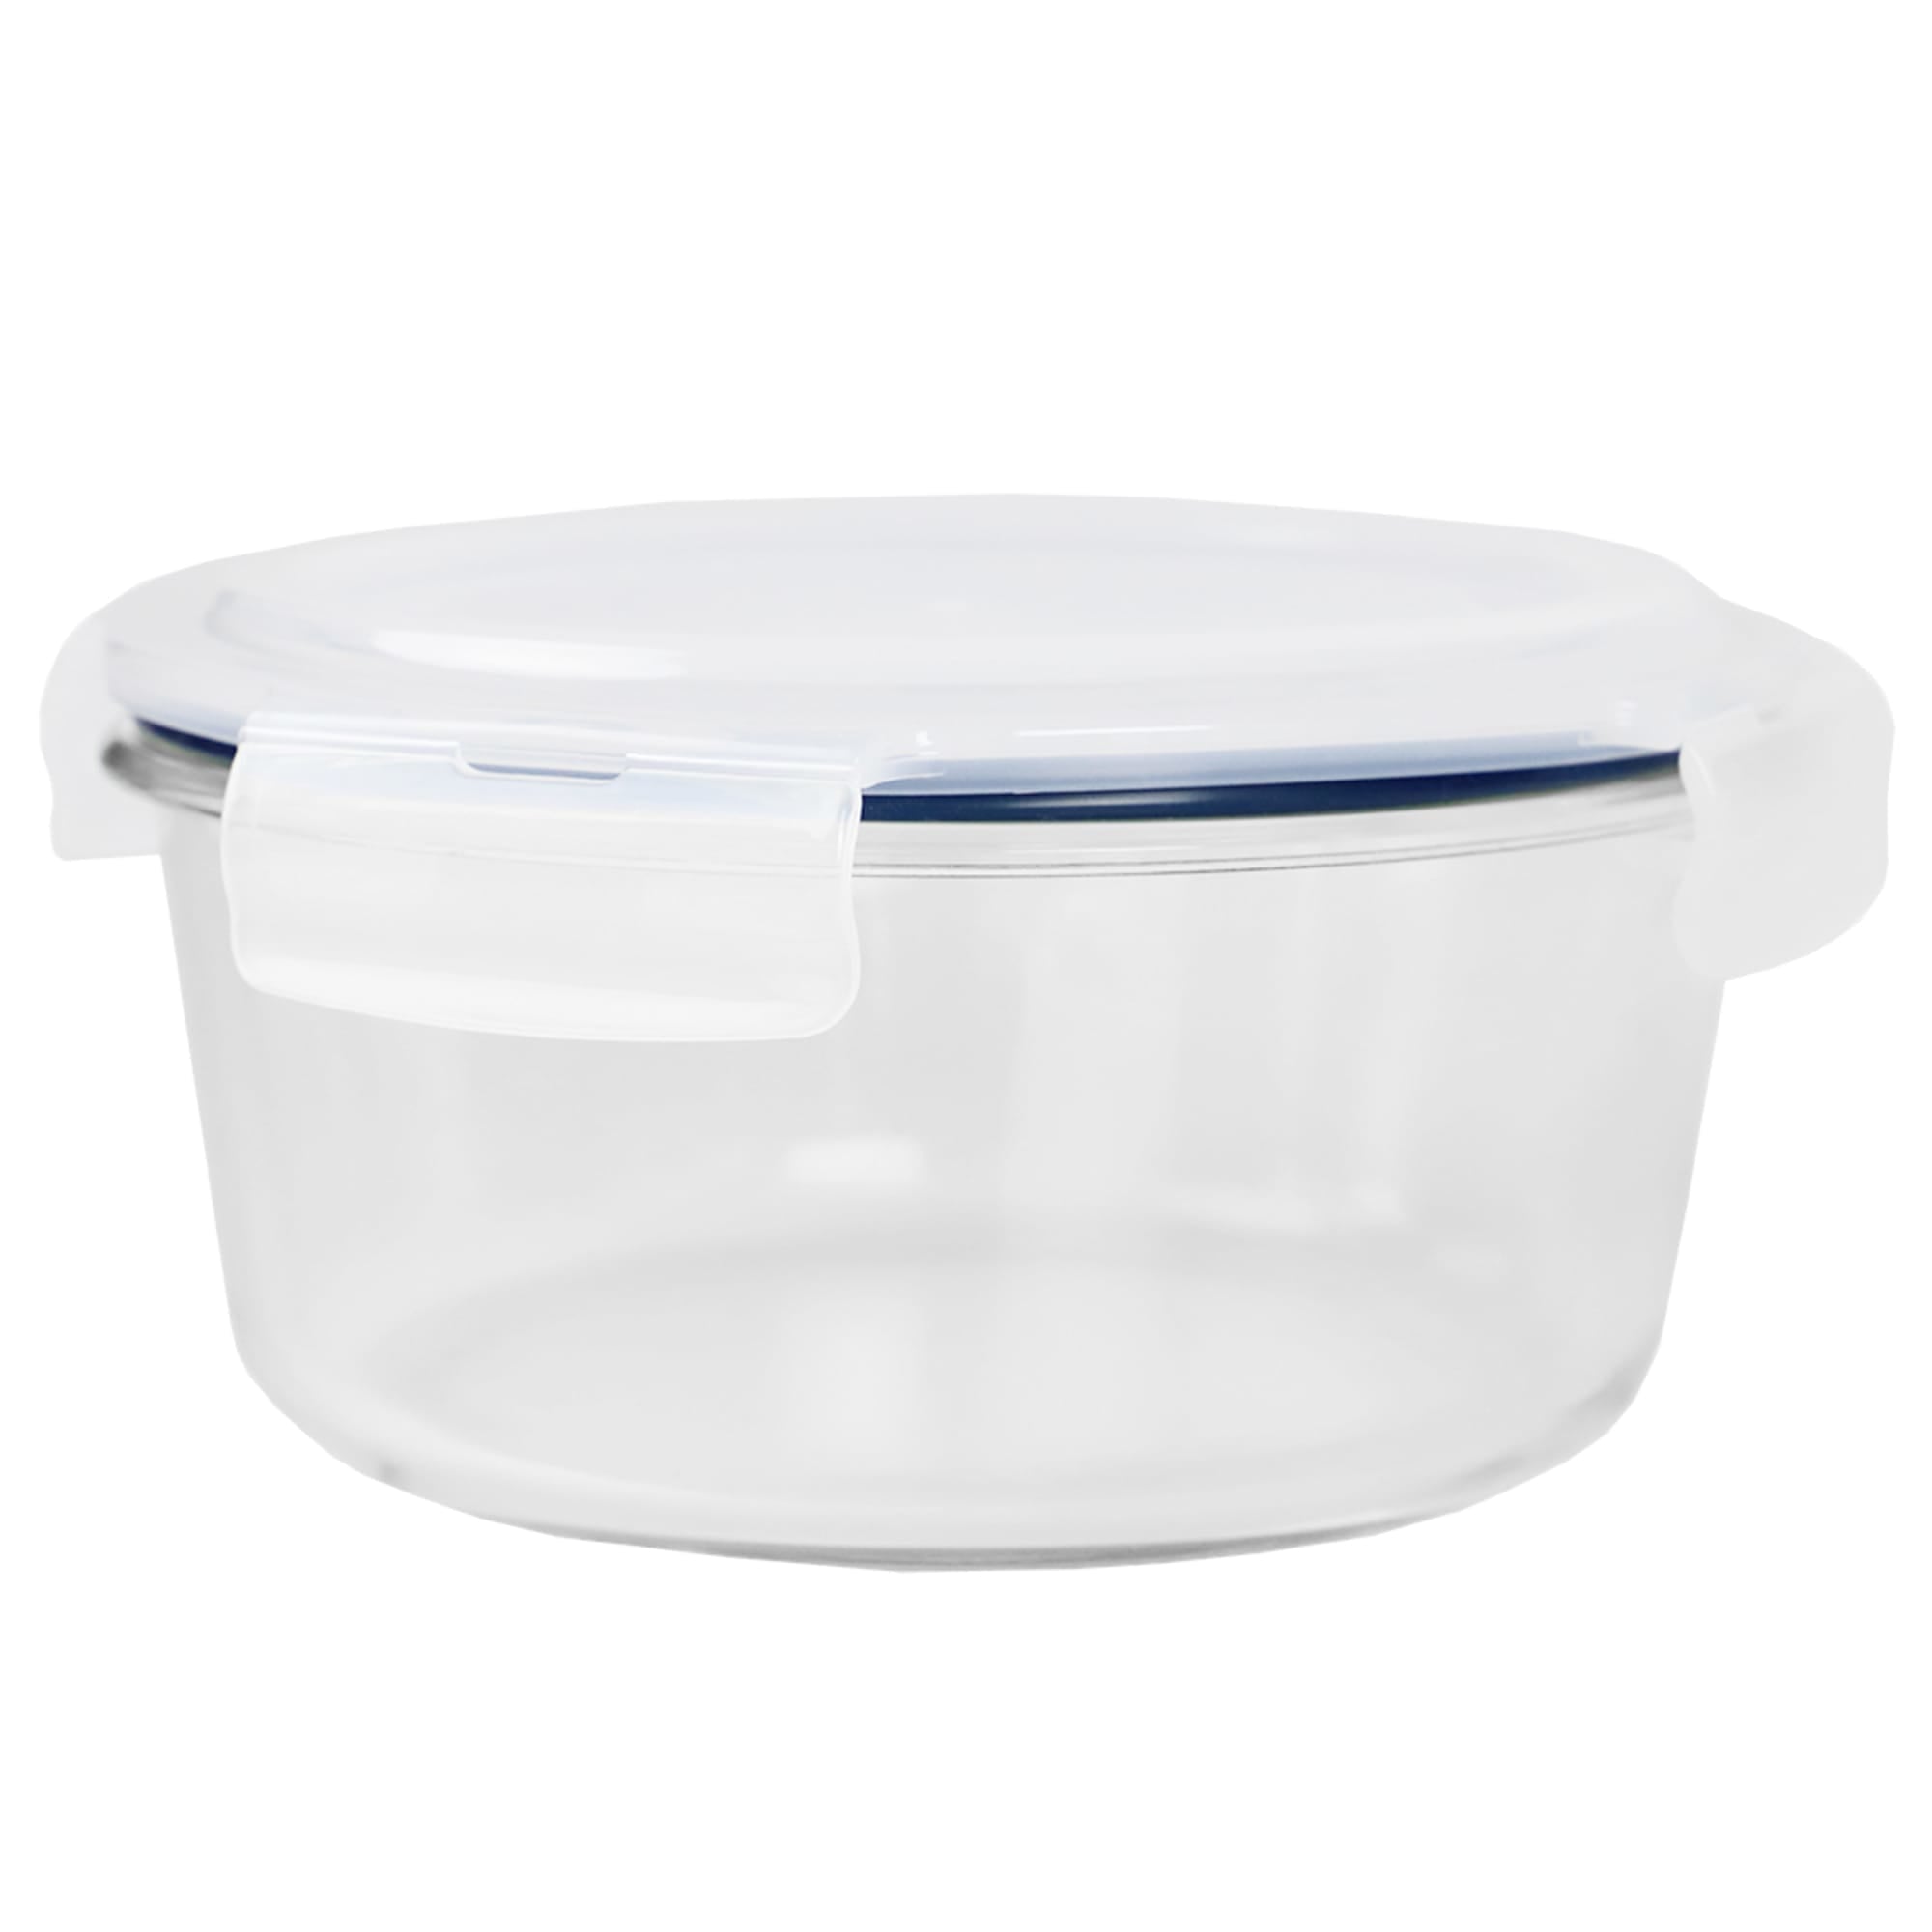 Michael Graves Design 58 Ounce High Borosilicate Glass Round Food Storage Container with Indigo Rubber Seal $8.00 EACH, CASE PACK OF 12